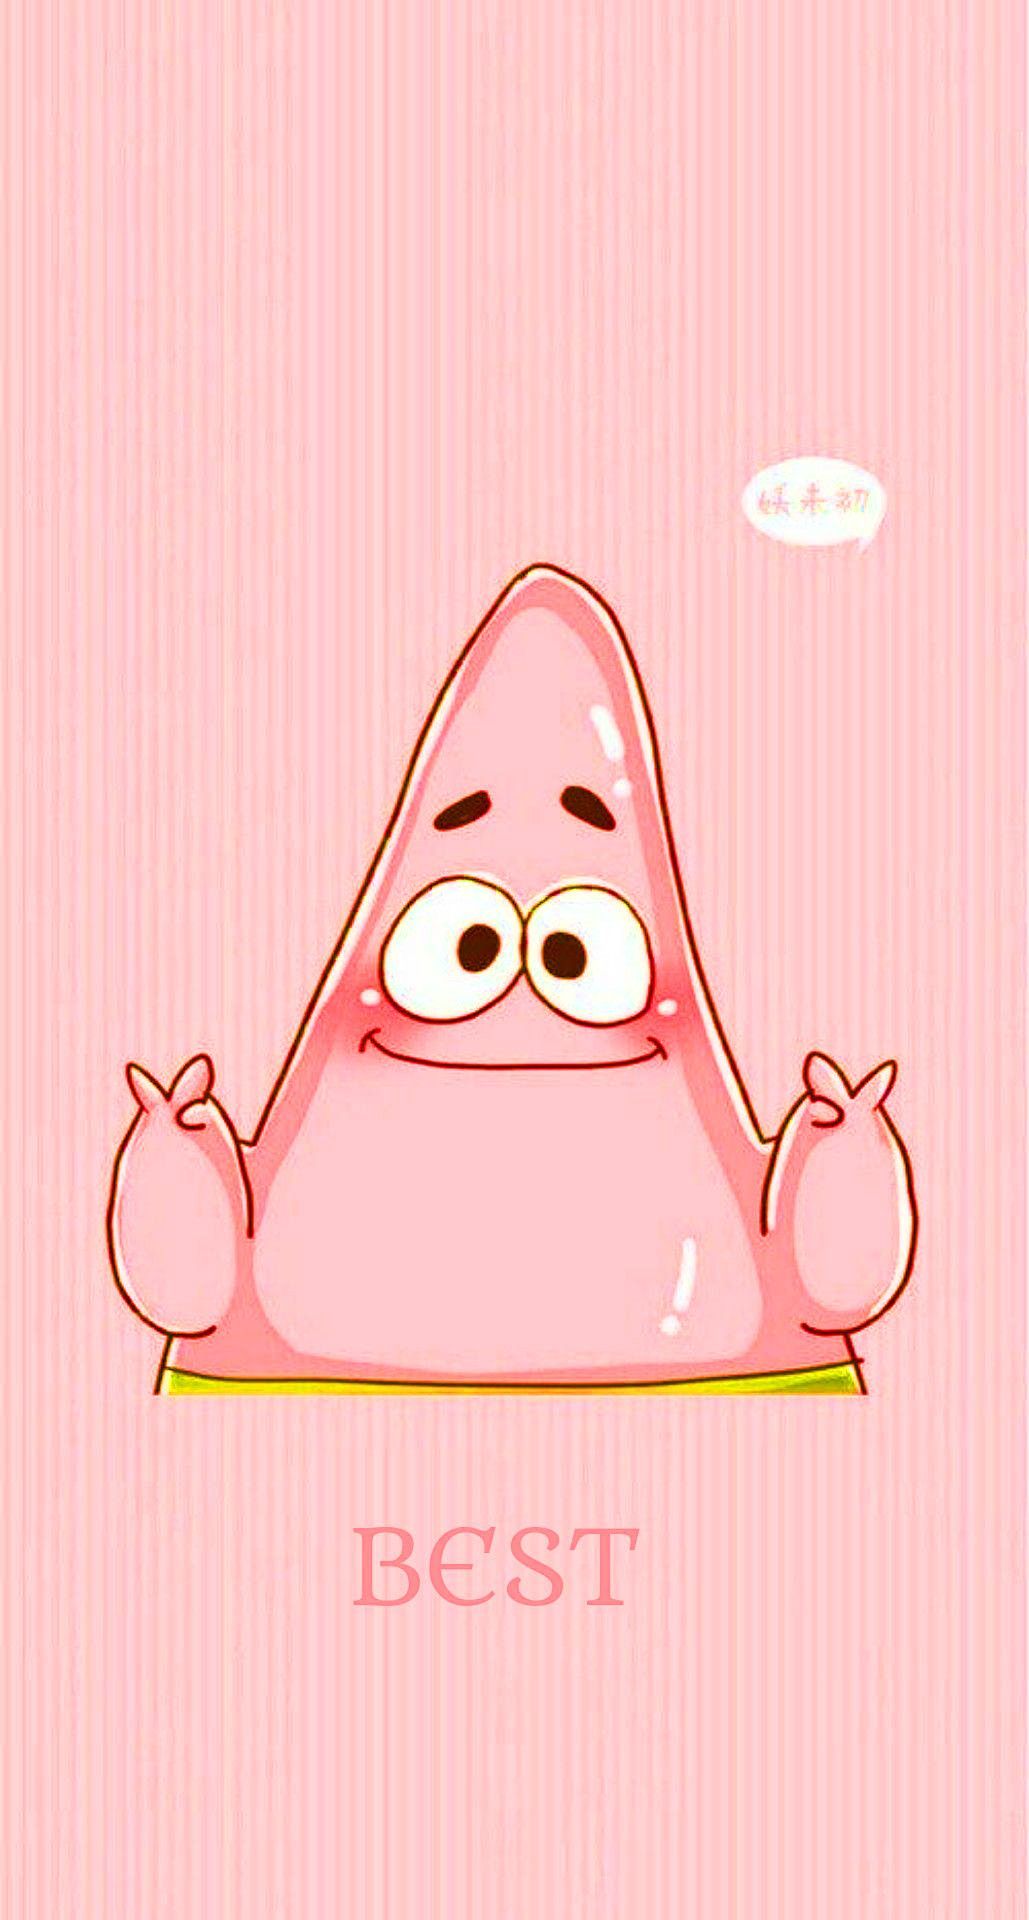 Patrick Star is a character from the SpongeBob SquarePants television series. He is a pink starfish who lives in a pineapple under the sea. He is best friends with SpongeBob SquarePants and Squidward Tentacles. - Bestie